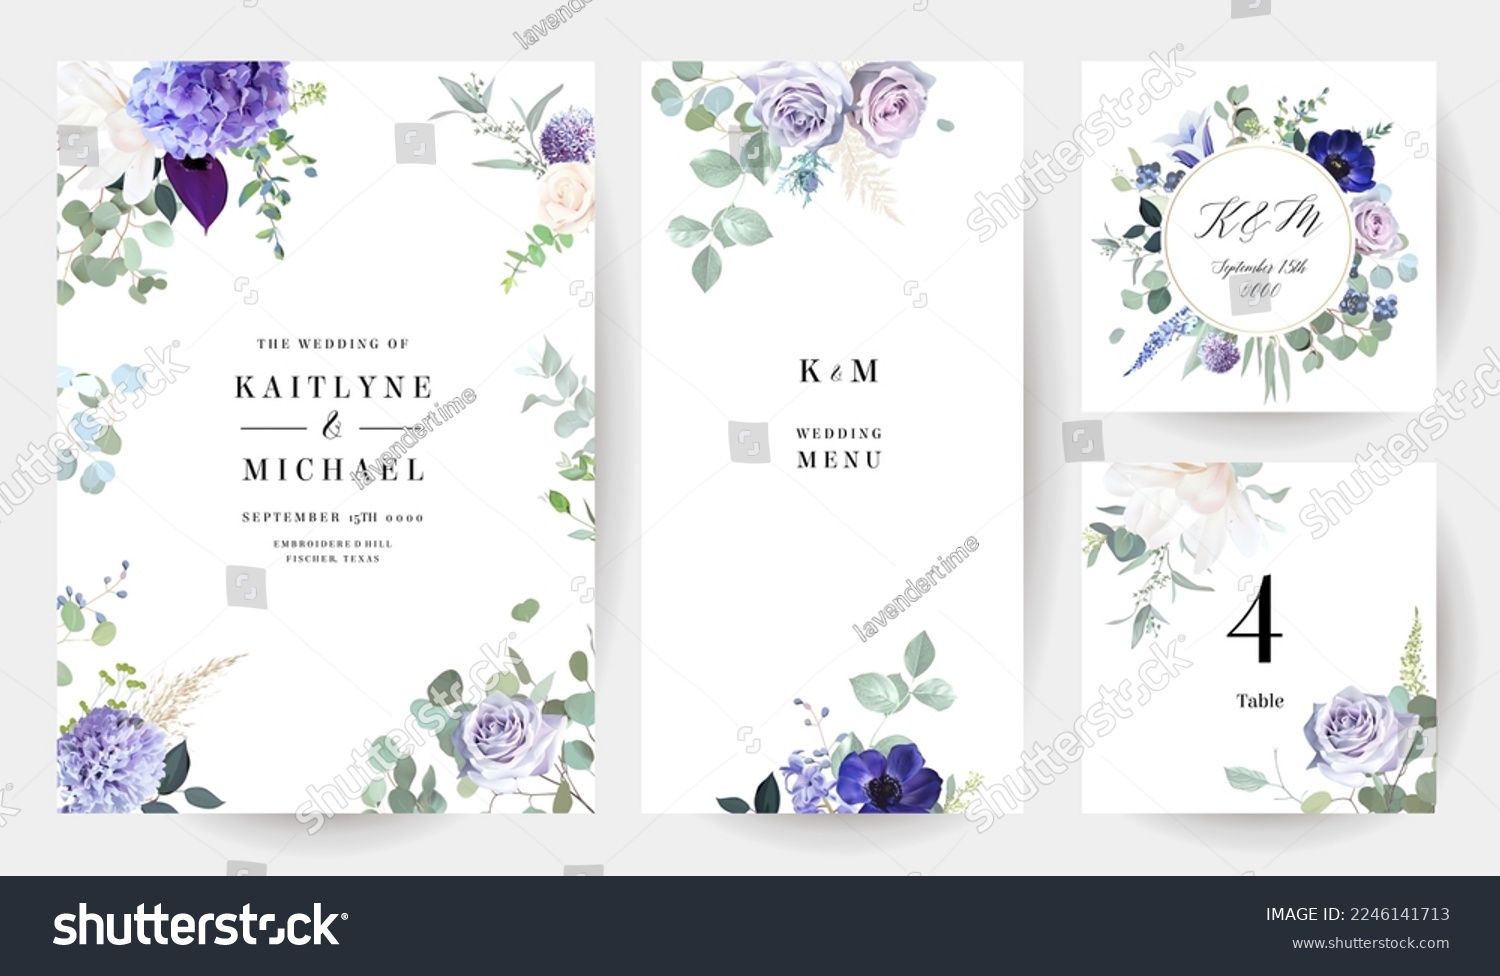 SVG of Pale purple rose, dusty mauve and lilac hyacinth, violet anemone, lavender, white magnolia, campanula, eucalyptus vector design frames. Wedding flower round cards. Elements are isolated and editable svg